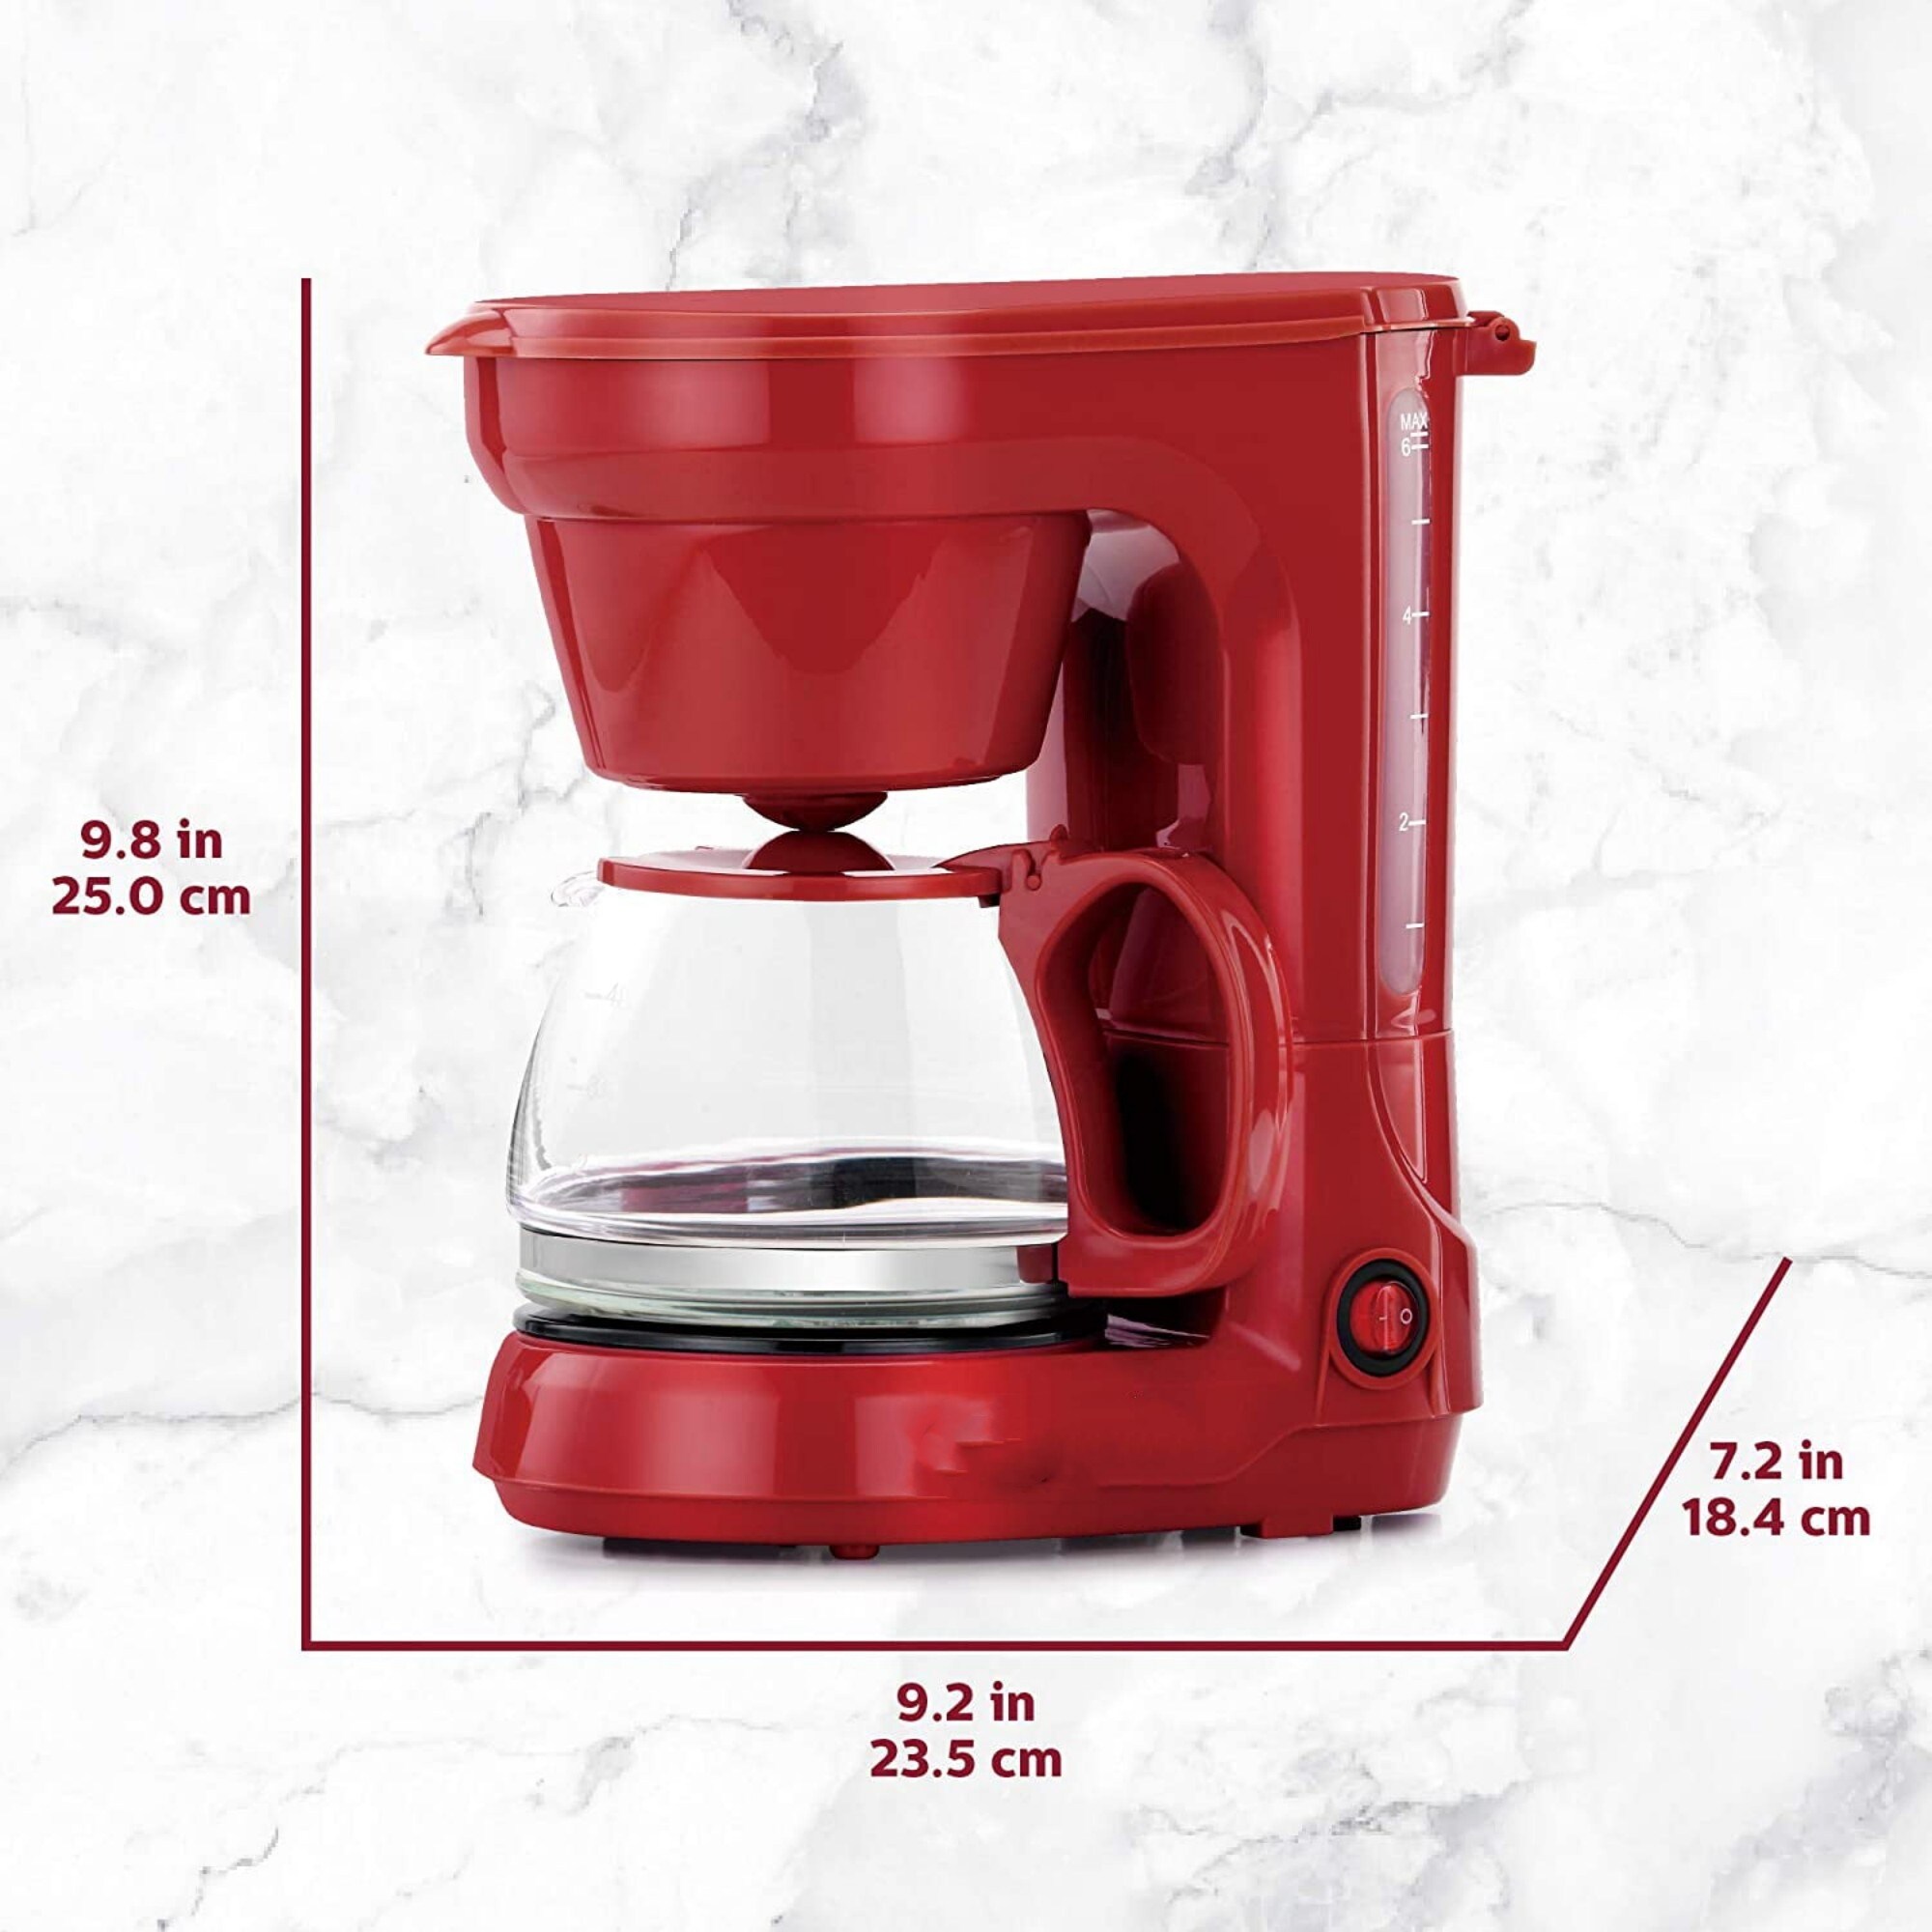 https://ak1.ostkcdn.com/images/products/is/images/direct/29d35b580ea0850f464ae8ba6db5e3c508991a8d/5CUP-Coffee-Maker---Space-Saving-Design%2C-Auto-Pause-and-Serve%2C-Removable-Filter-Basket%2C-BLACK.jpg